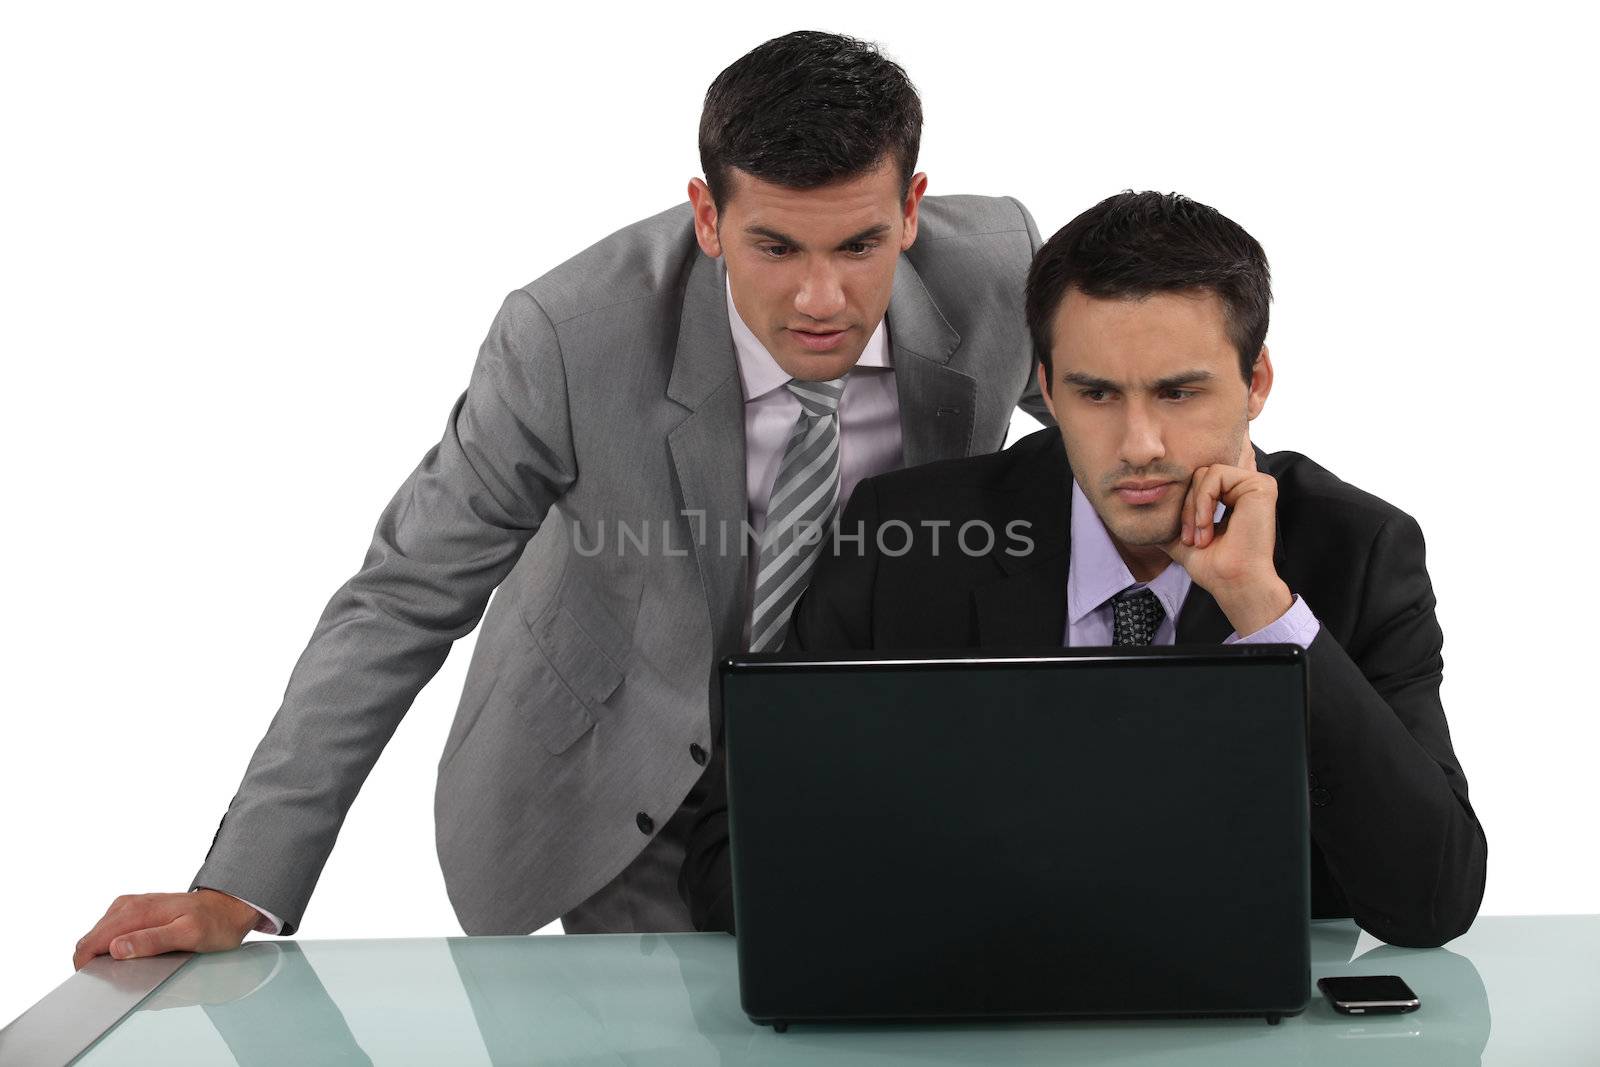 Business associates reading a distressing e-mail by phovoir